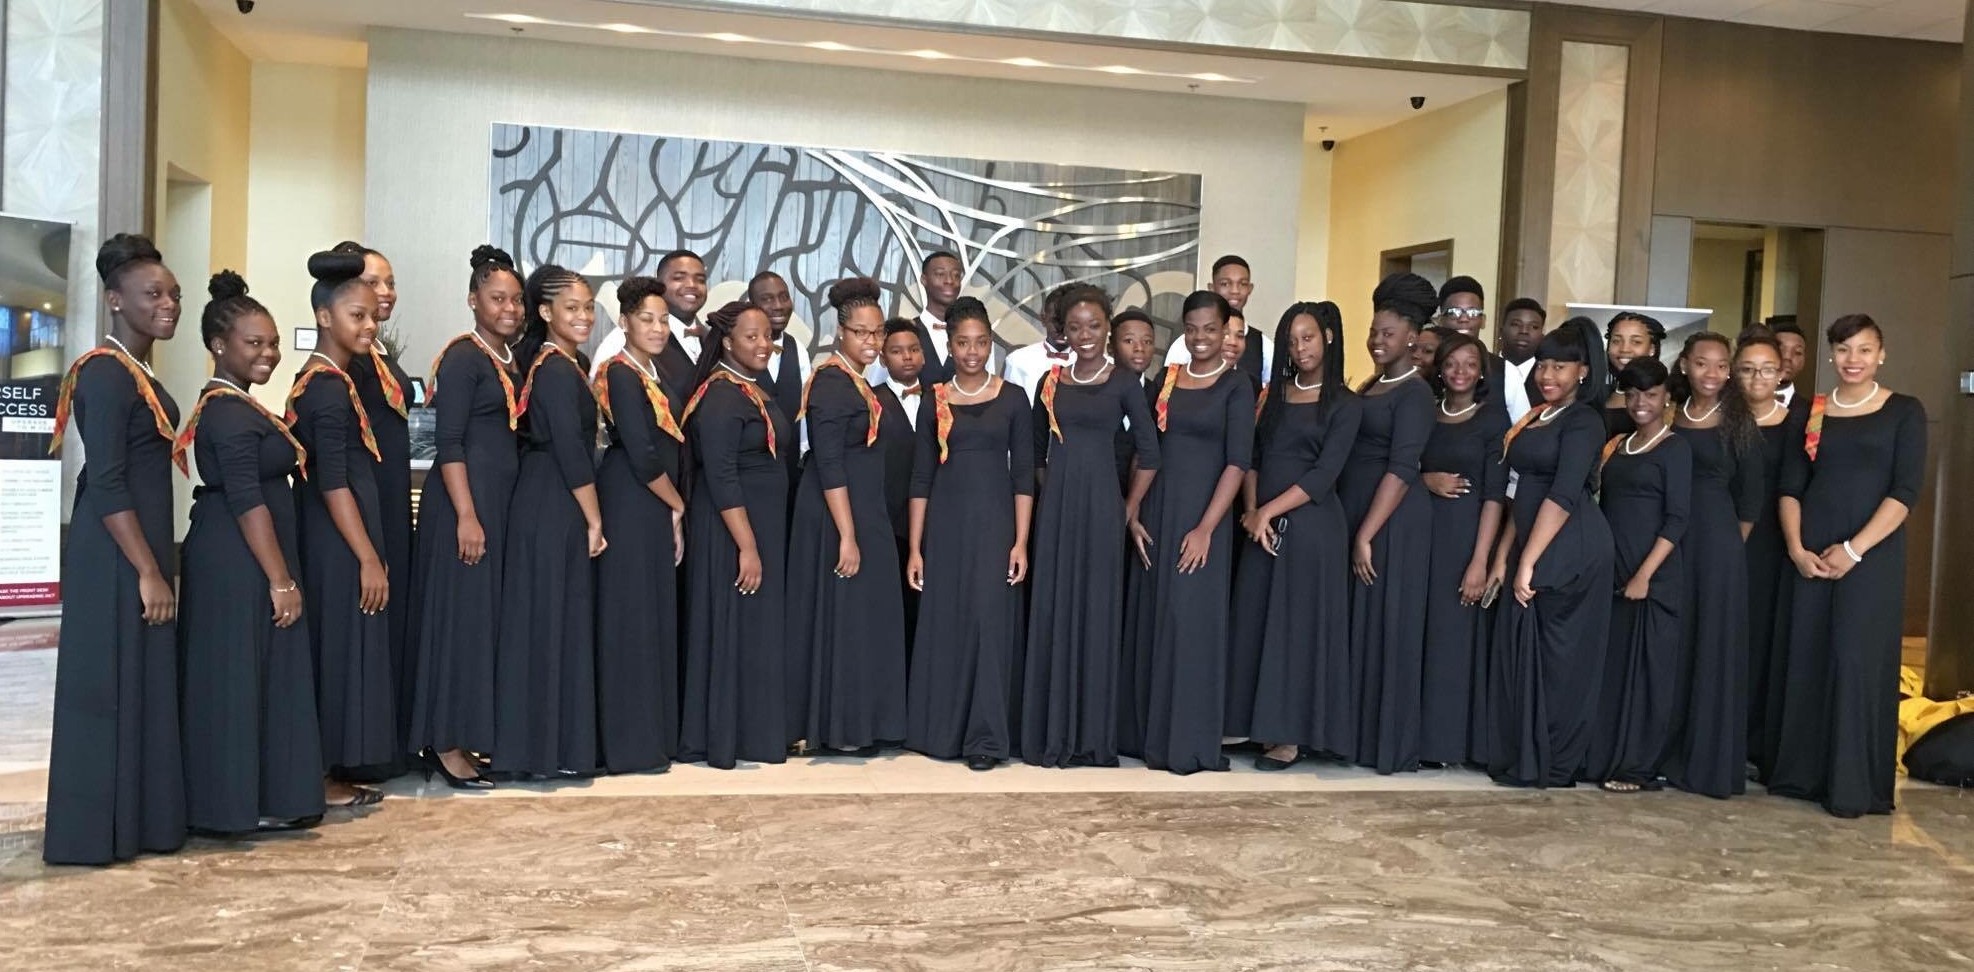 Unity Concert Choir at the Worldstrides New York Heritage Festival in New York City